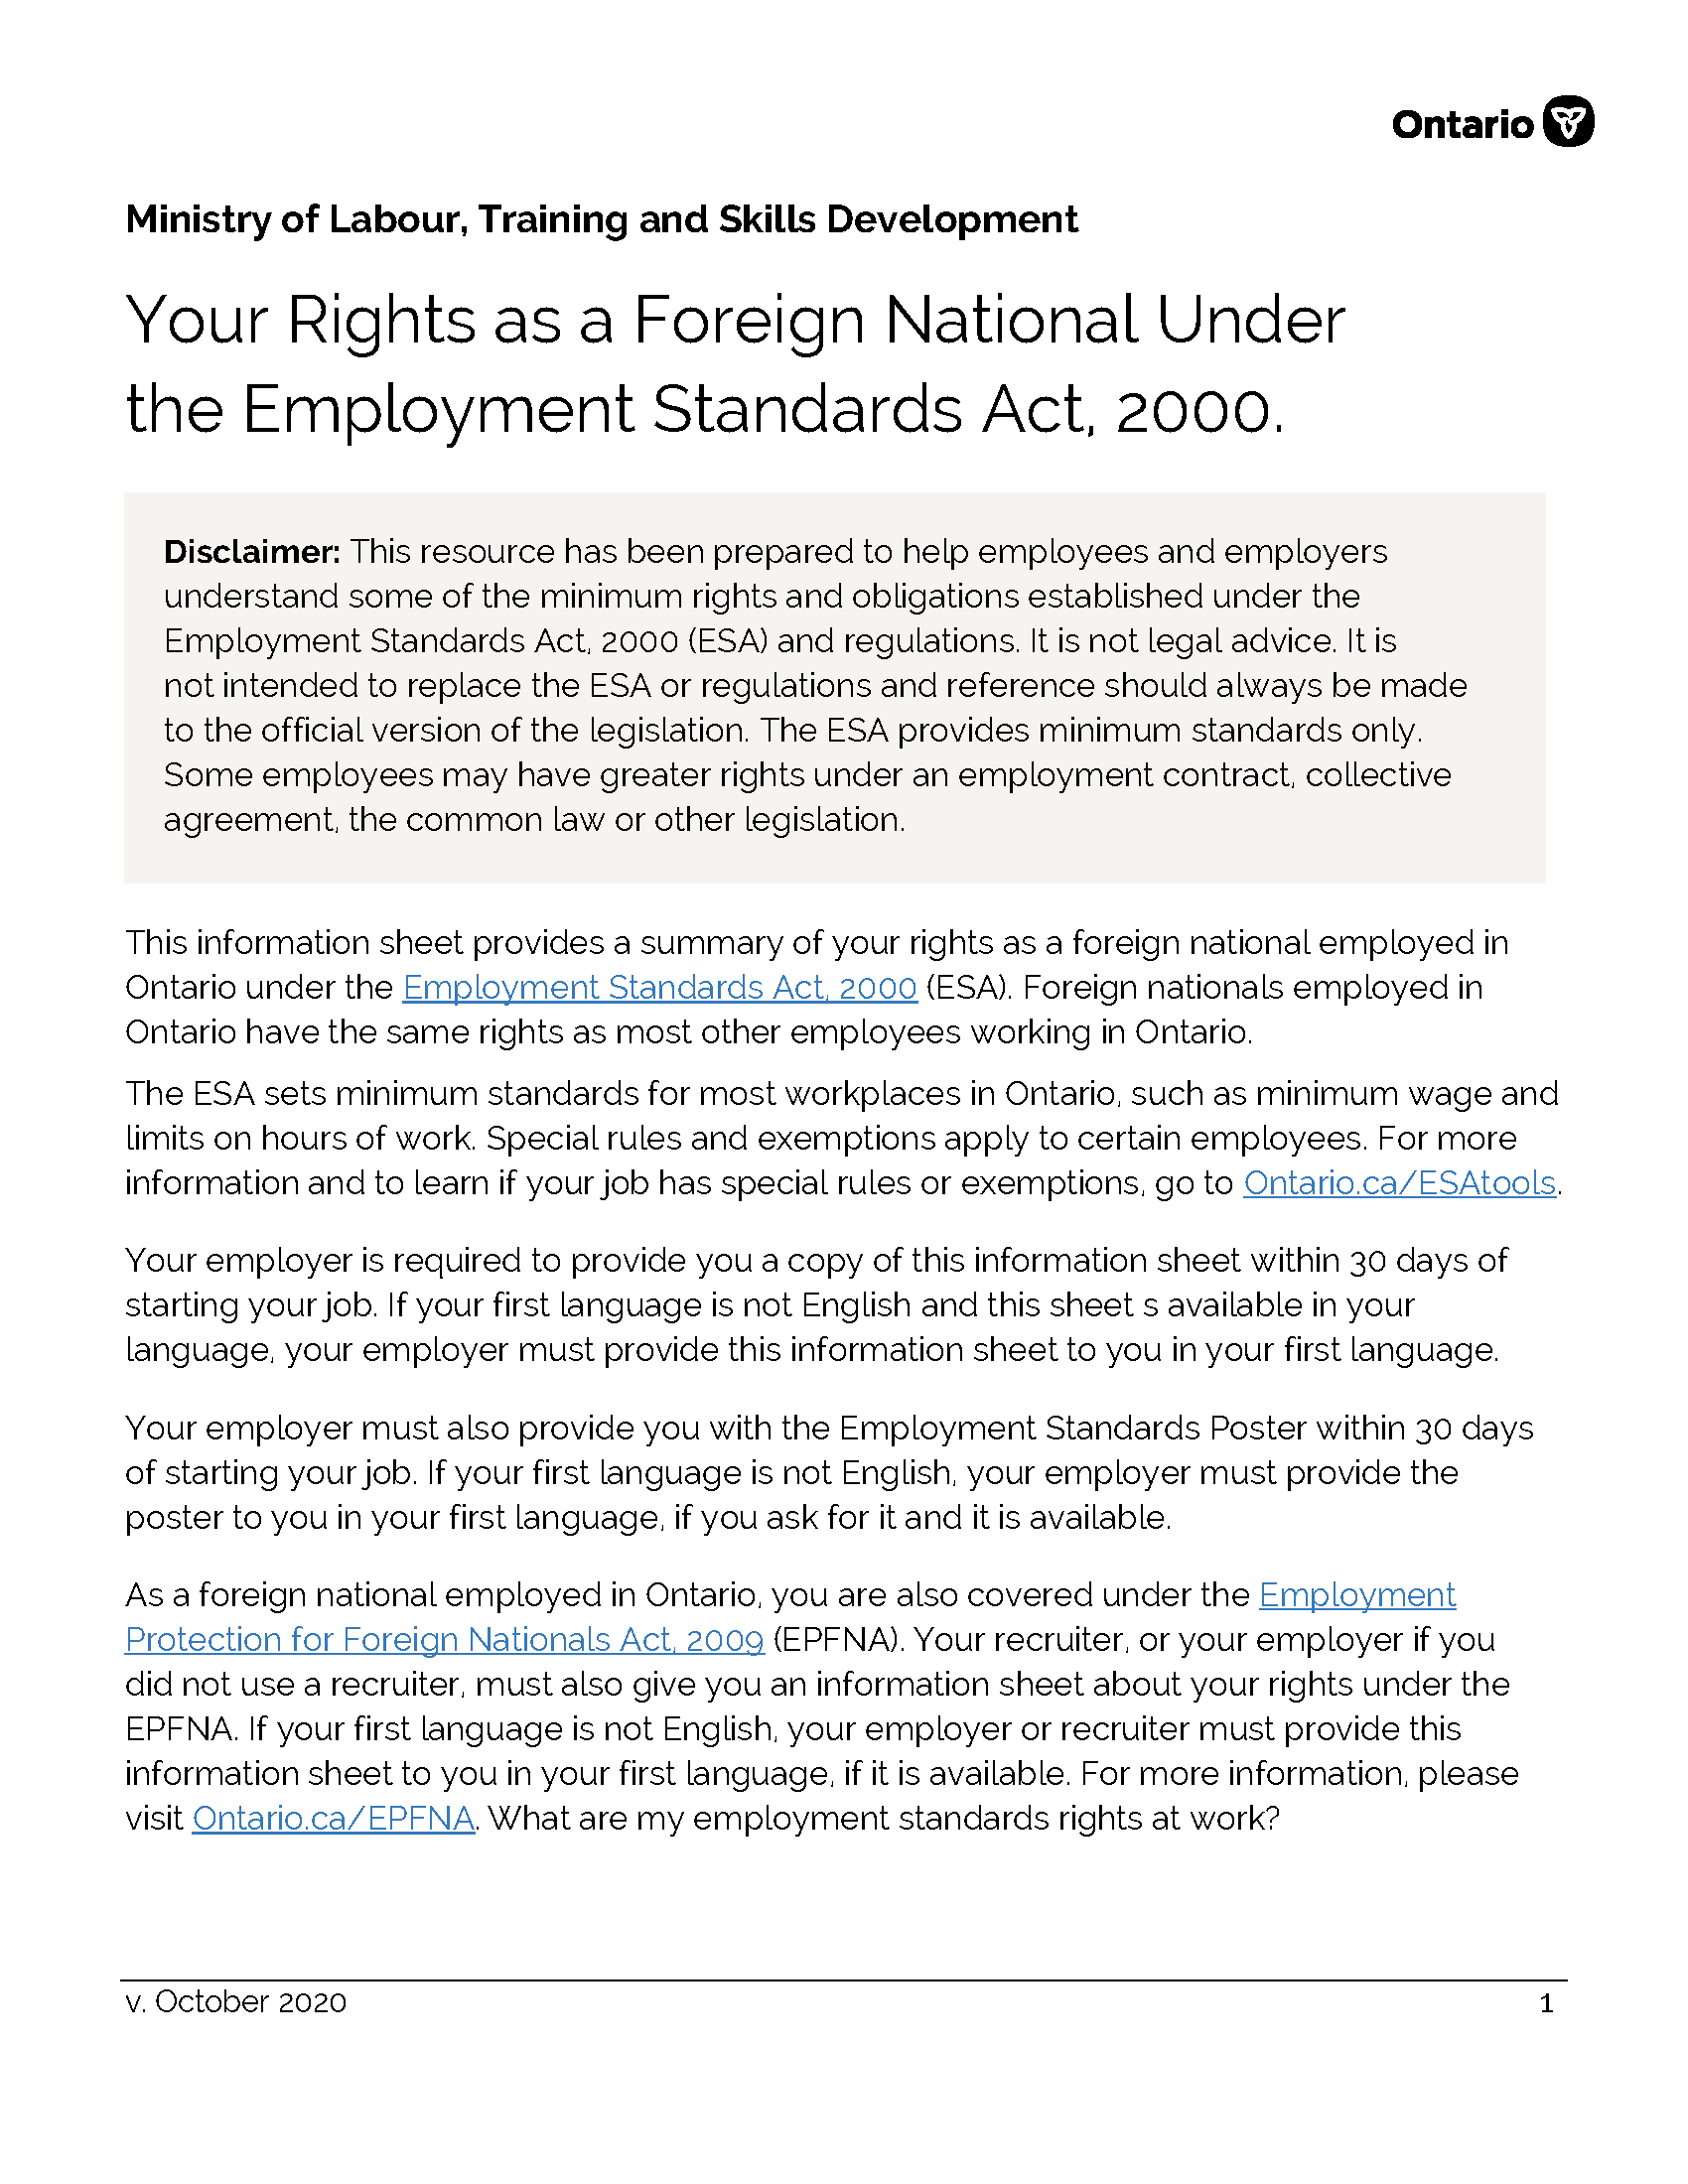 your rights as a foreign national page 1